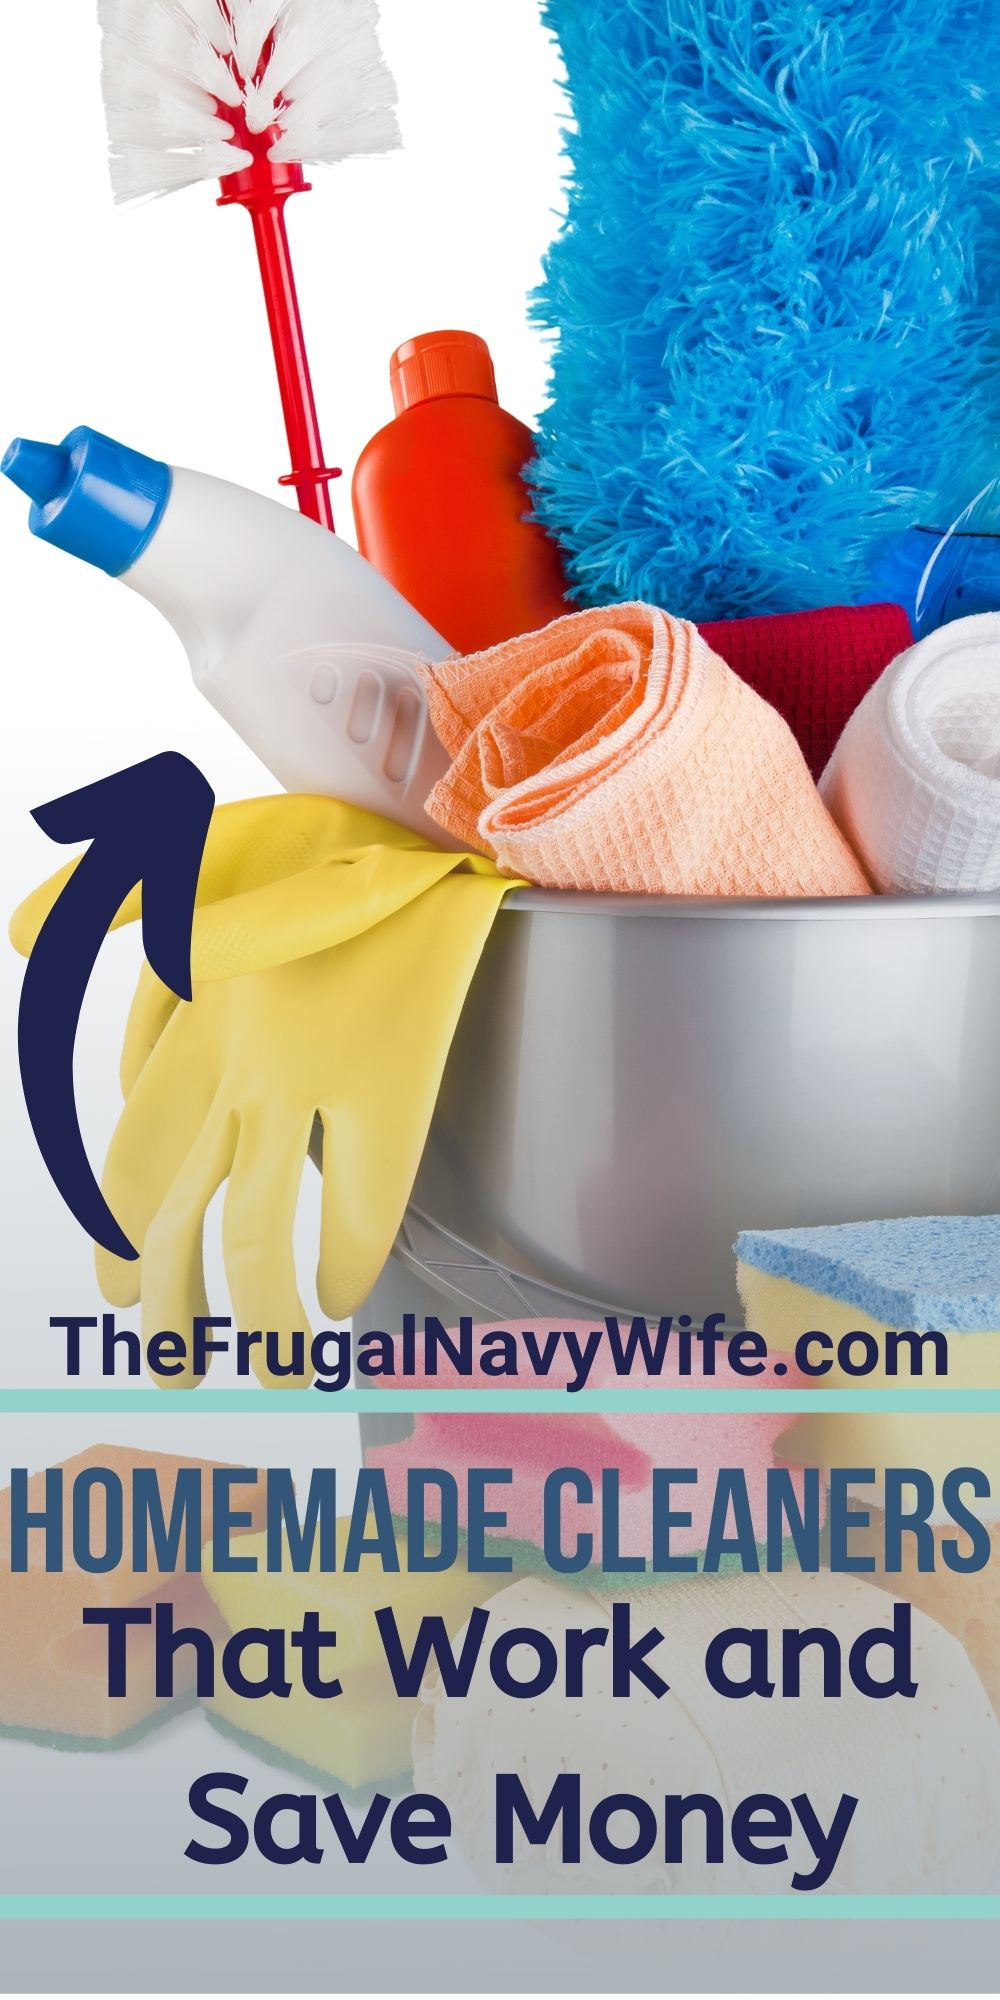 https://www.thefrugalnavywife.com/wp-content/uploads/2015/08/Homemade-Cleaners-That-Work-and-Save-Money-Pintrest.jpg